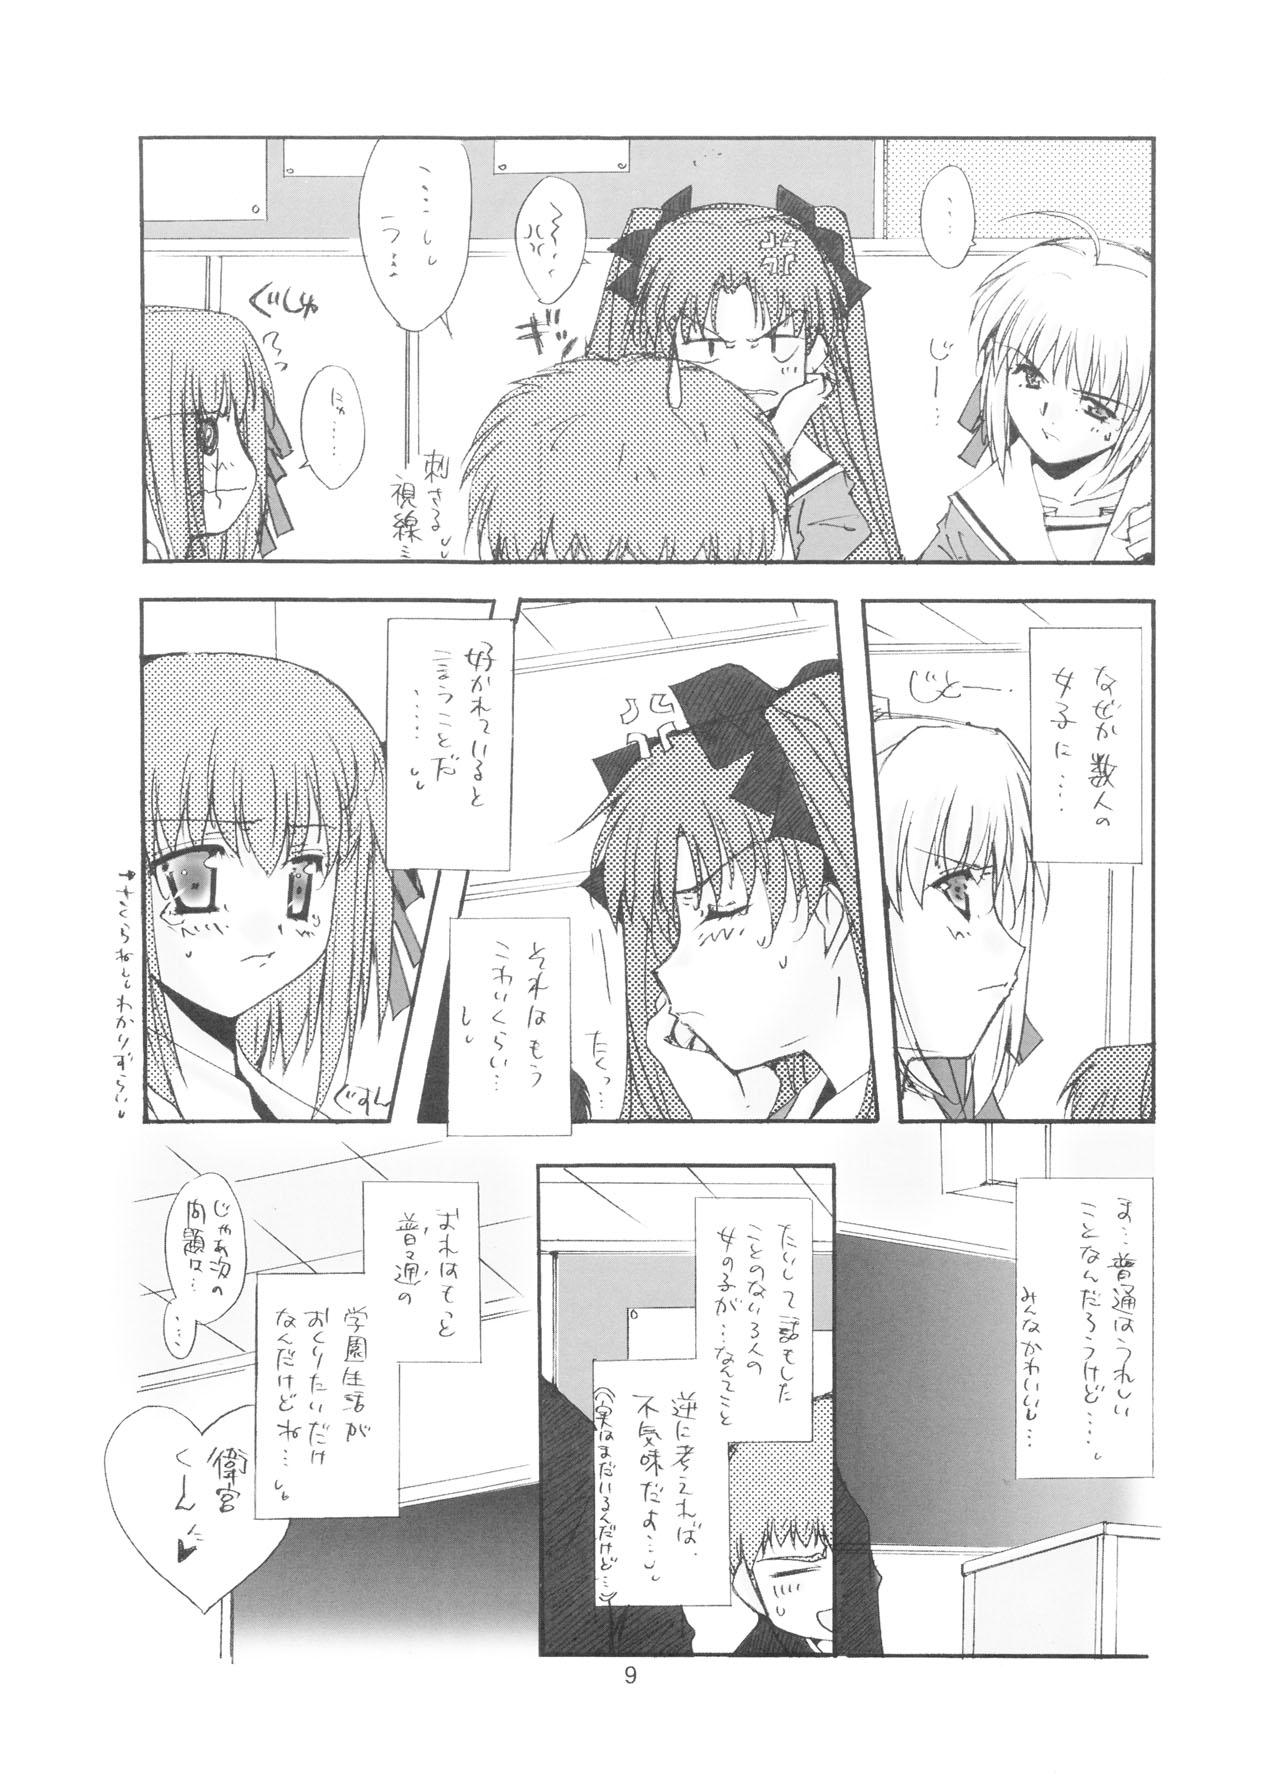 Oil PURPLE DIGNITY - Fate stay night Amador - Page 6